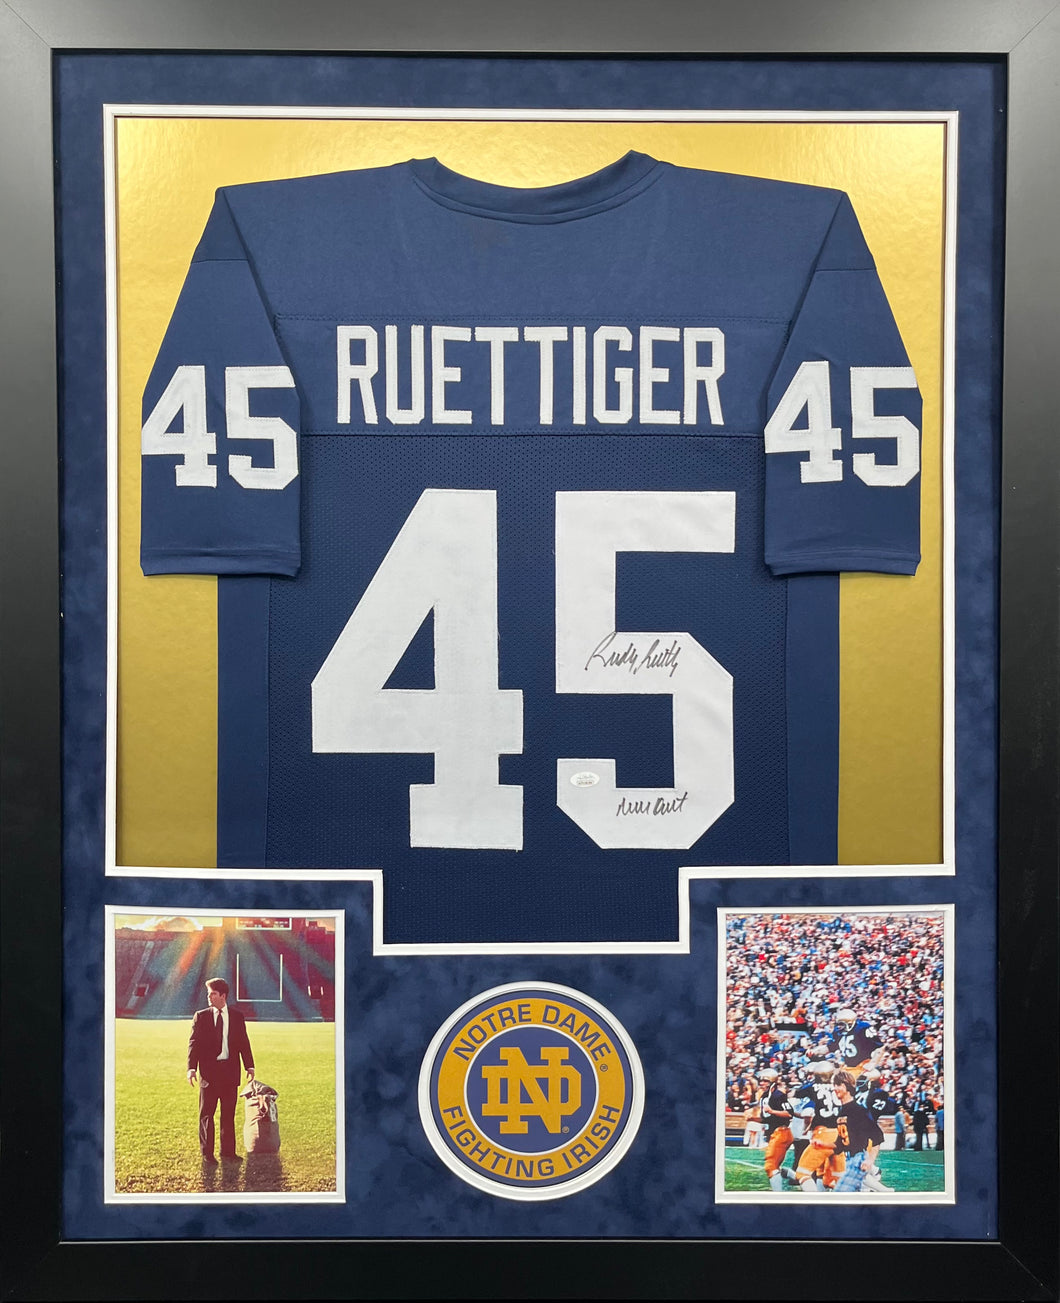 University of Notre Dame Fighting Irish Rudy Ruettiger Signed Custom Jersey Framed & Suede Matted with JSA COA